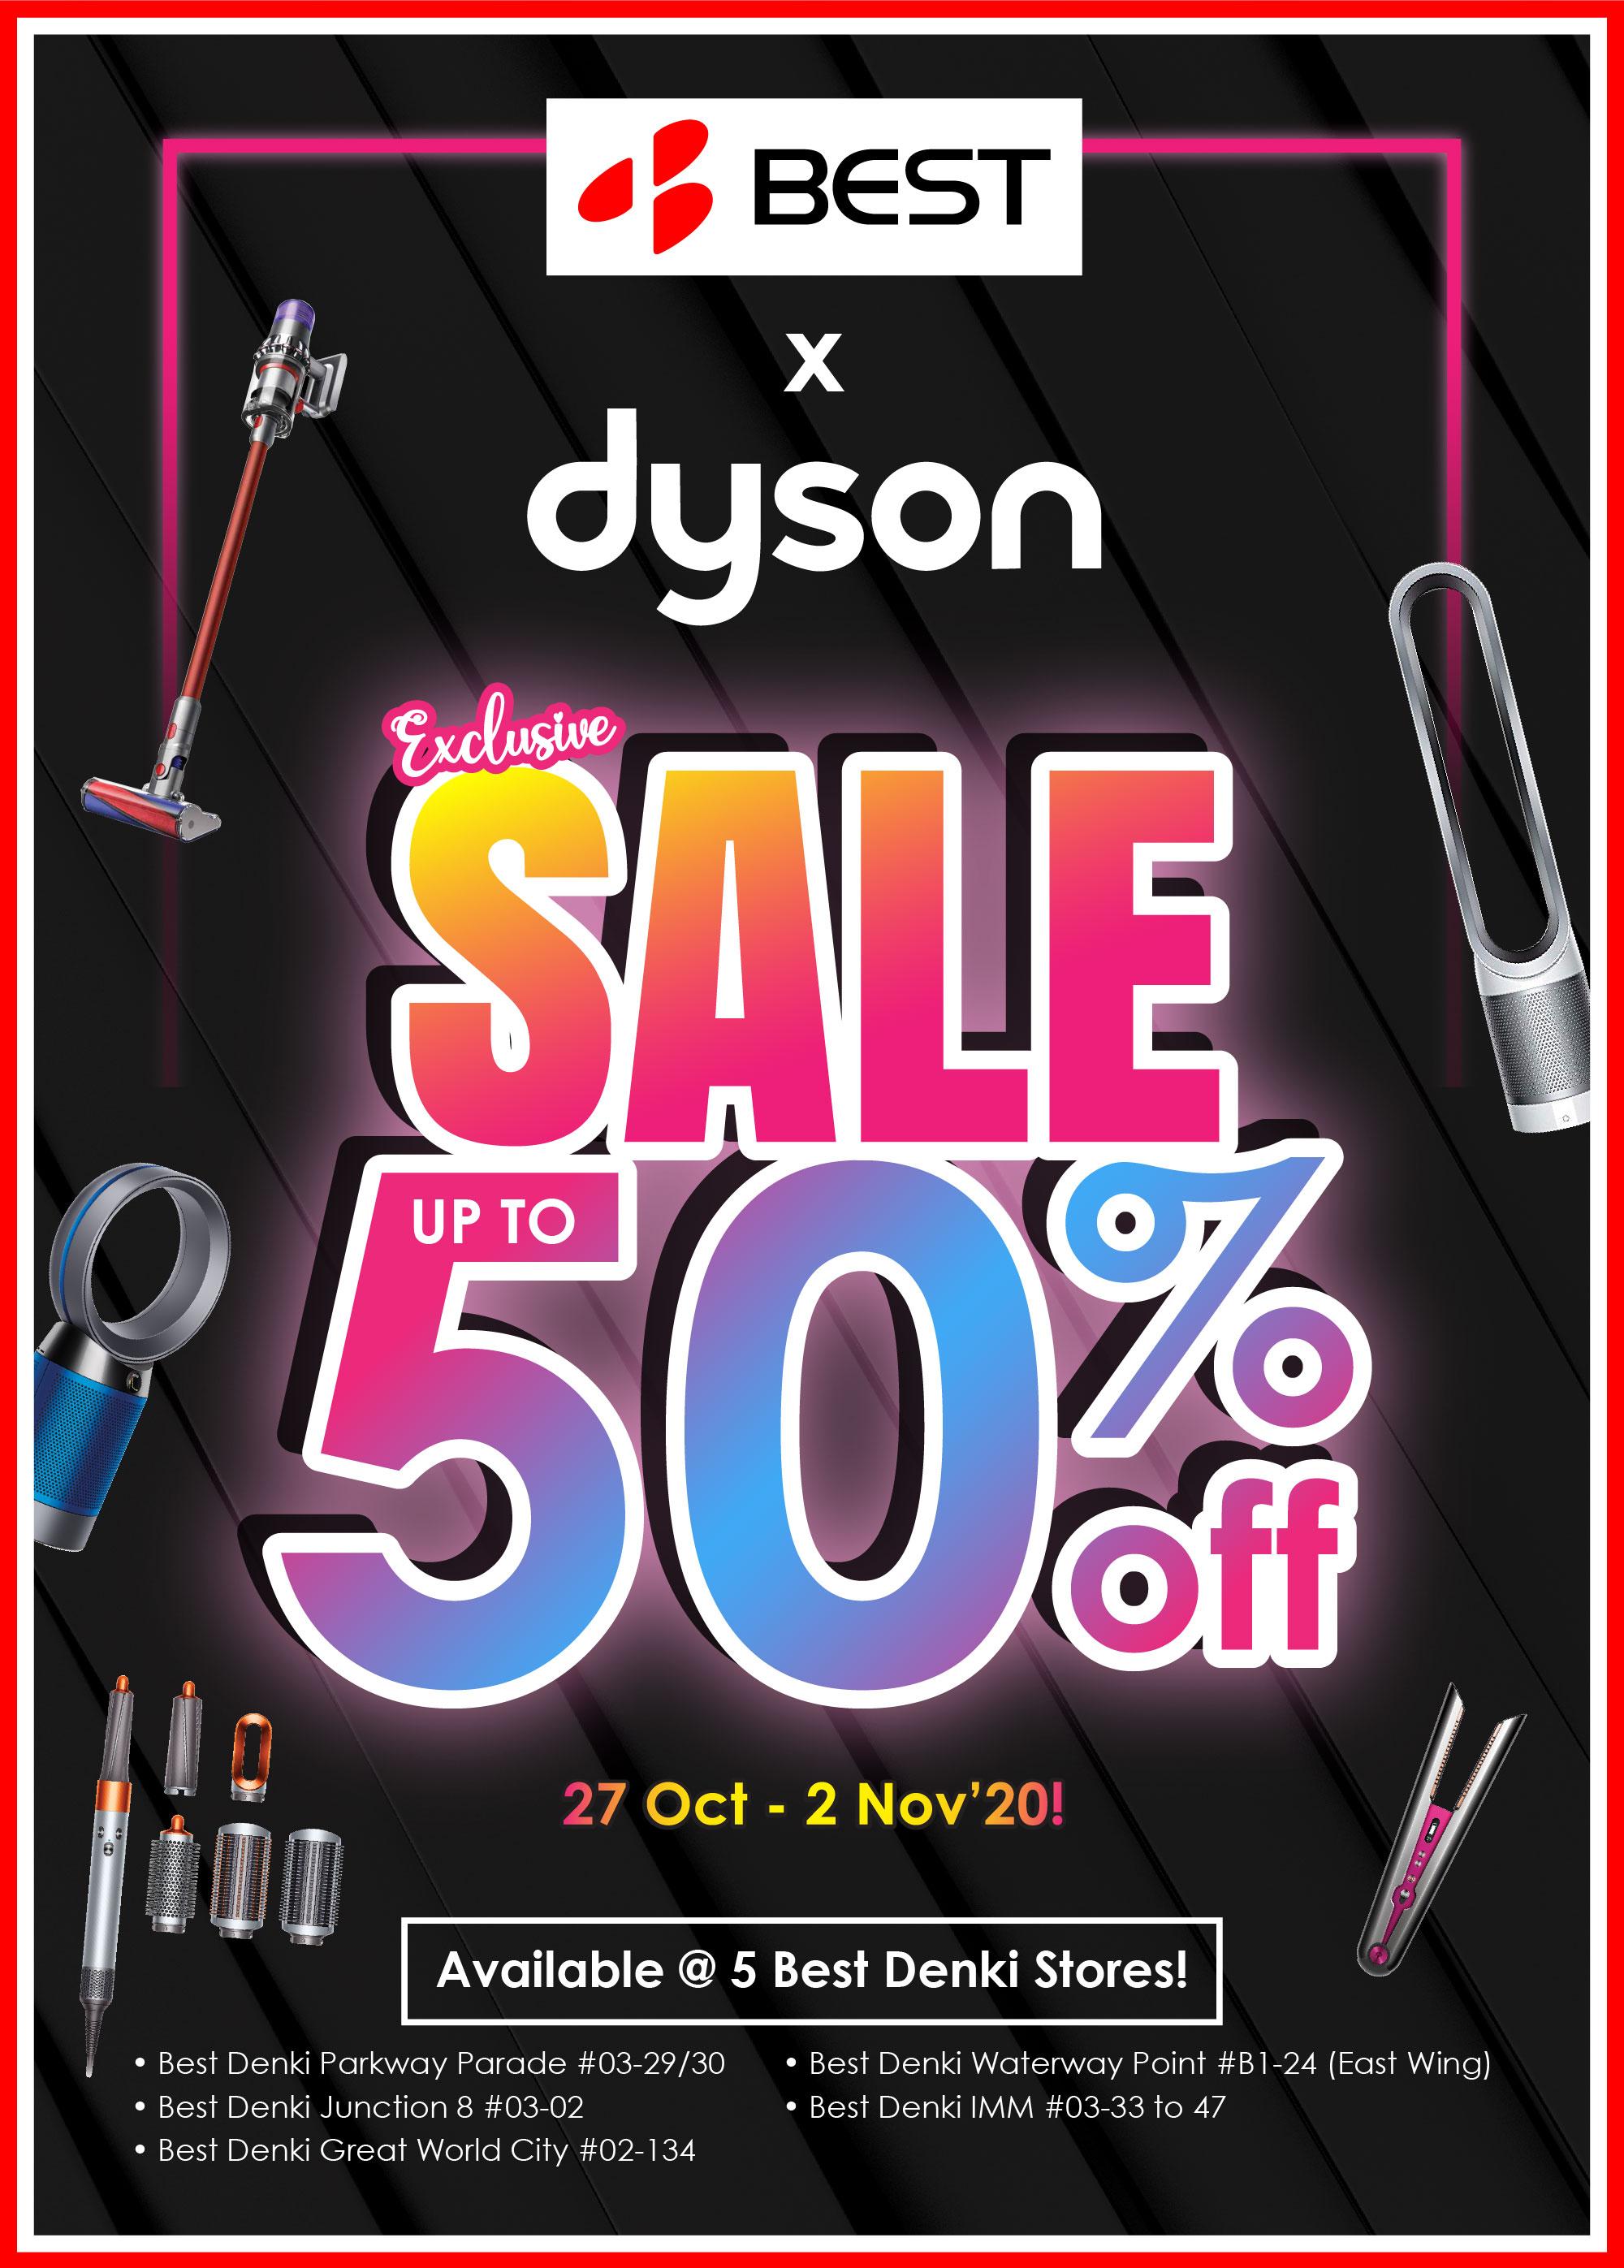 Best Denki: Up to 50% OFF Dyson Products Restocked till 02 Nov 2020